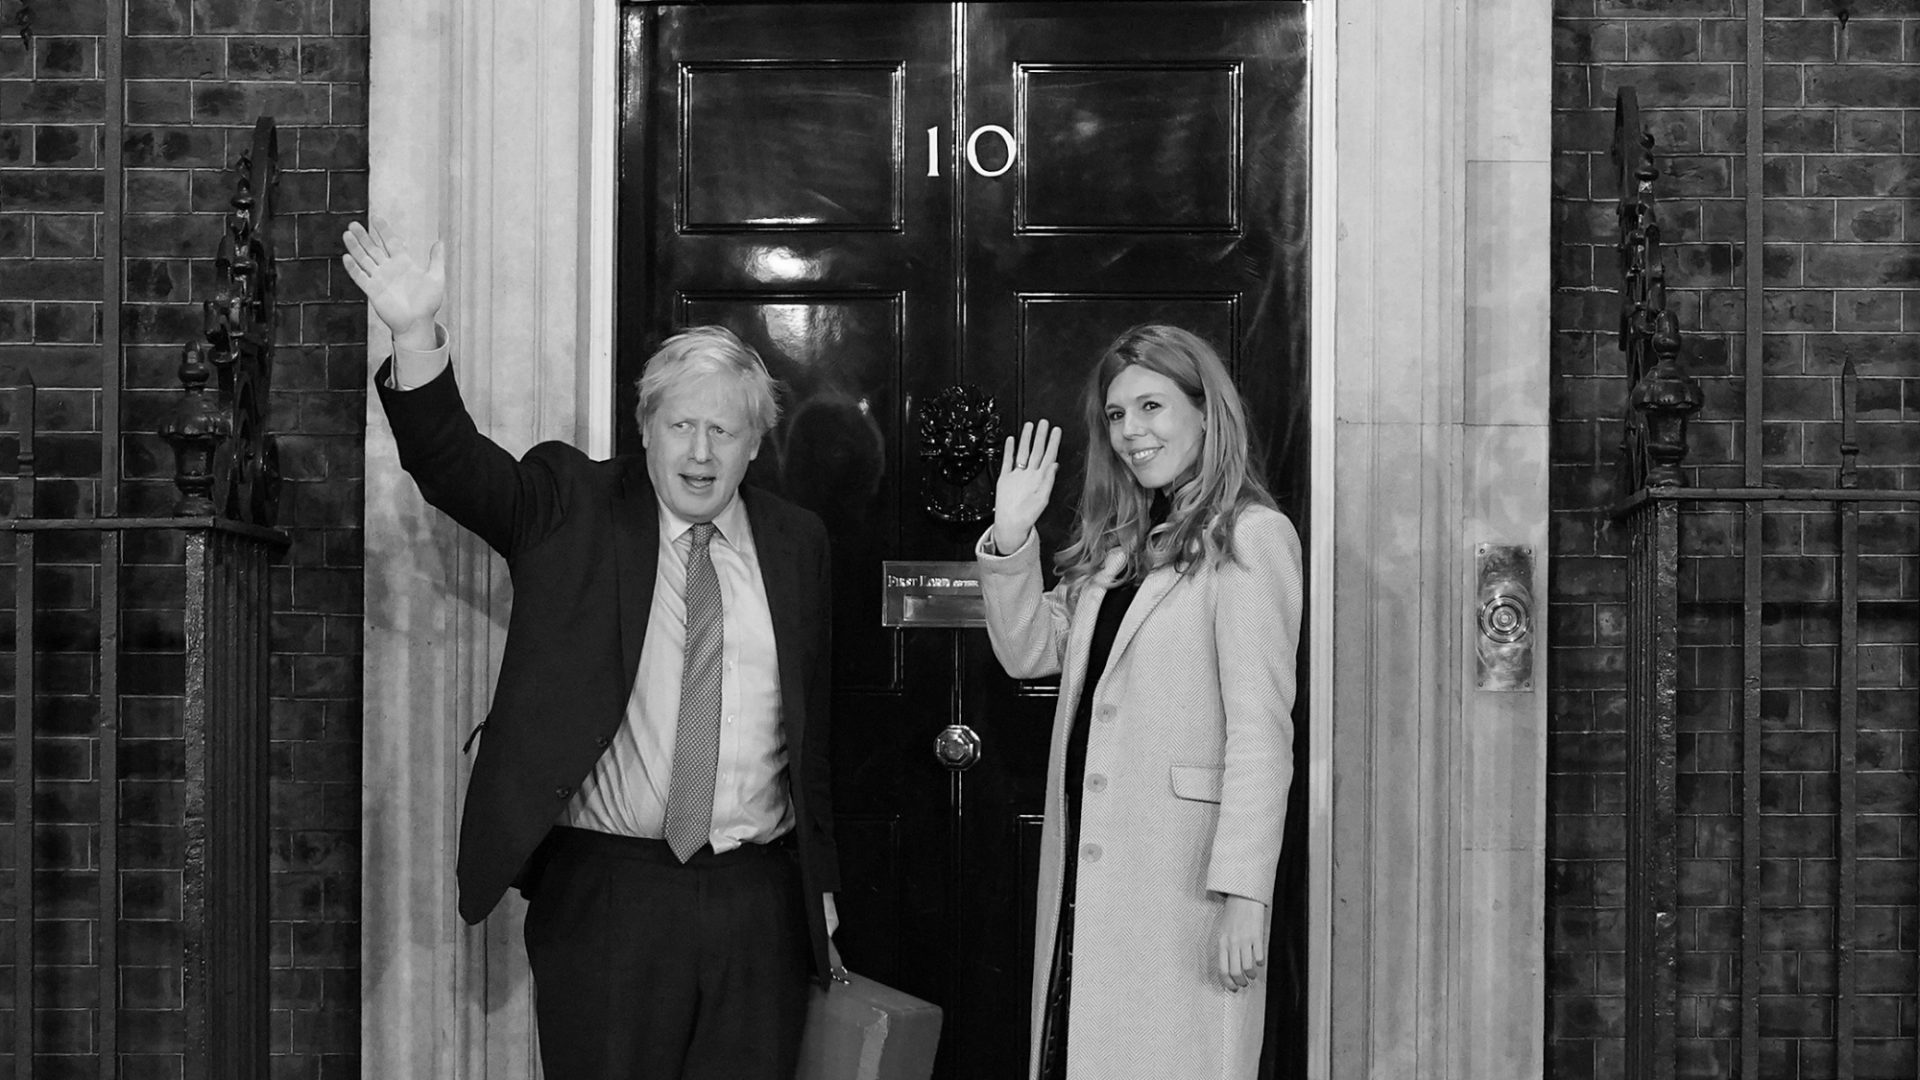 When Boris Johnson won the 2019 general election, the UK still had the Fixed-term Parliaments Act in place, meaning the next election should take place no later than May 2, 2024. Photo: Peter Summers/Getty